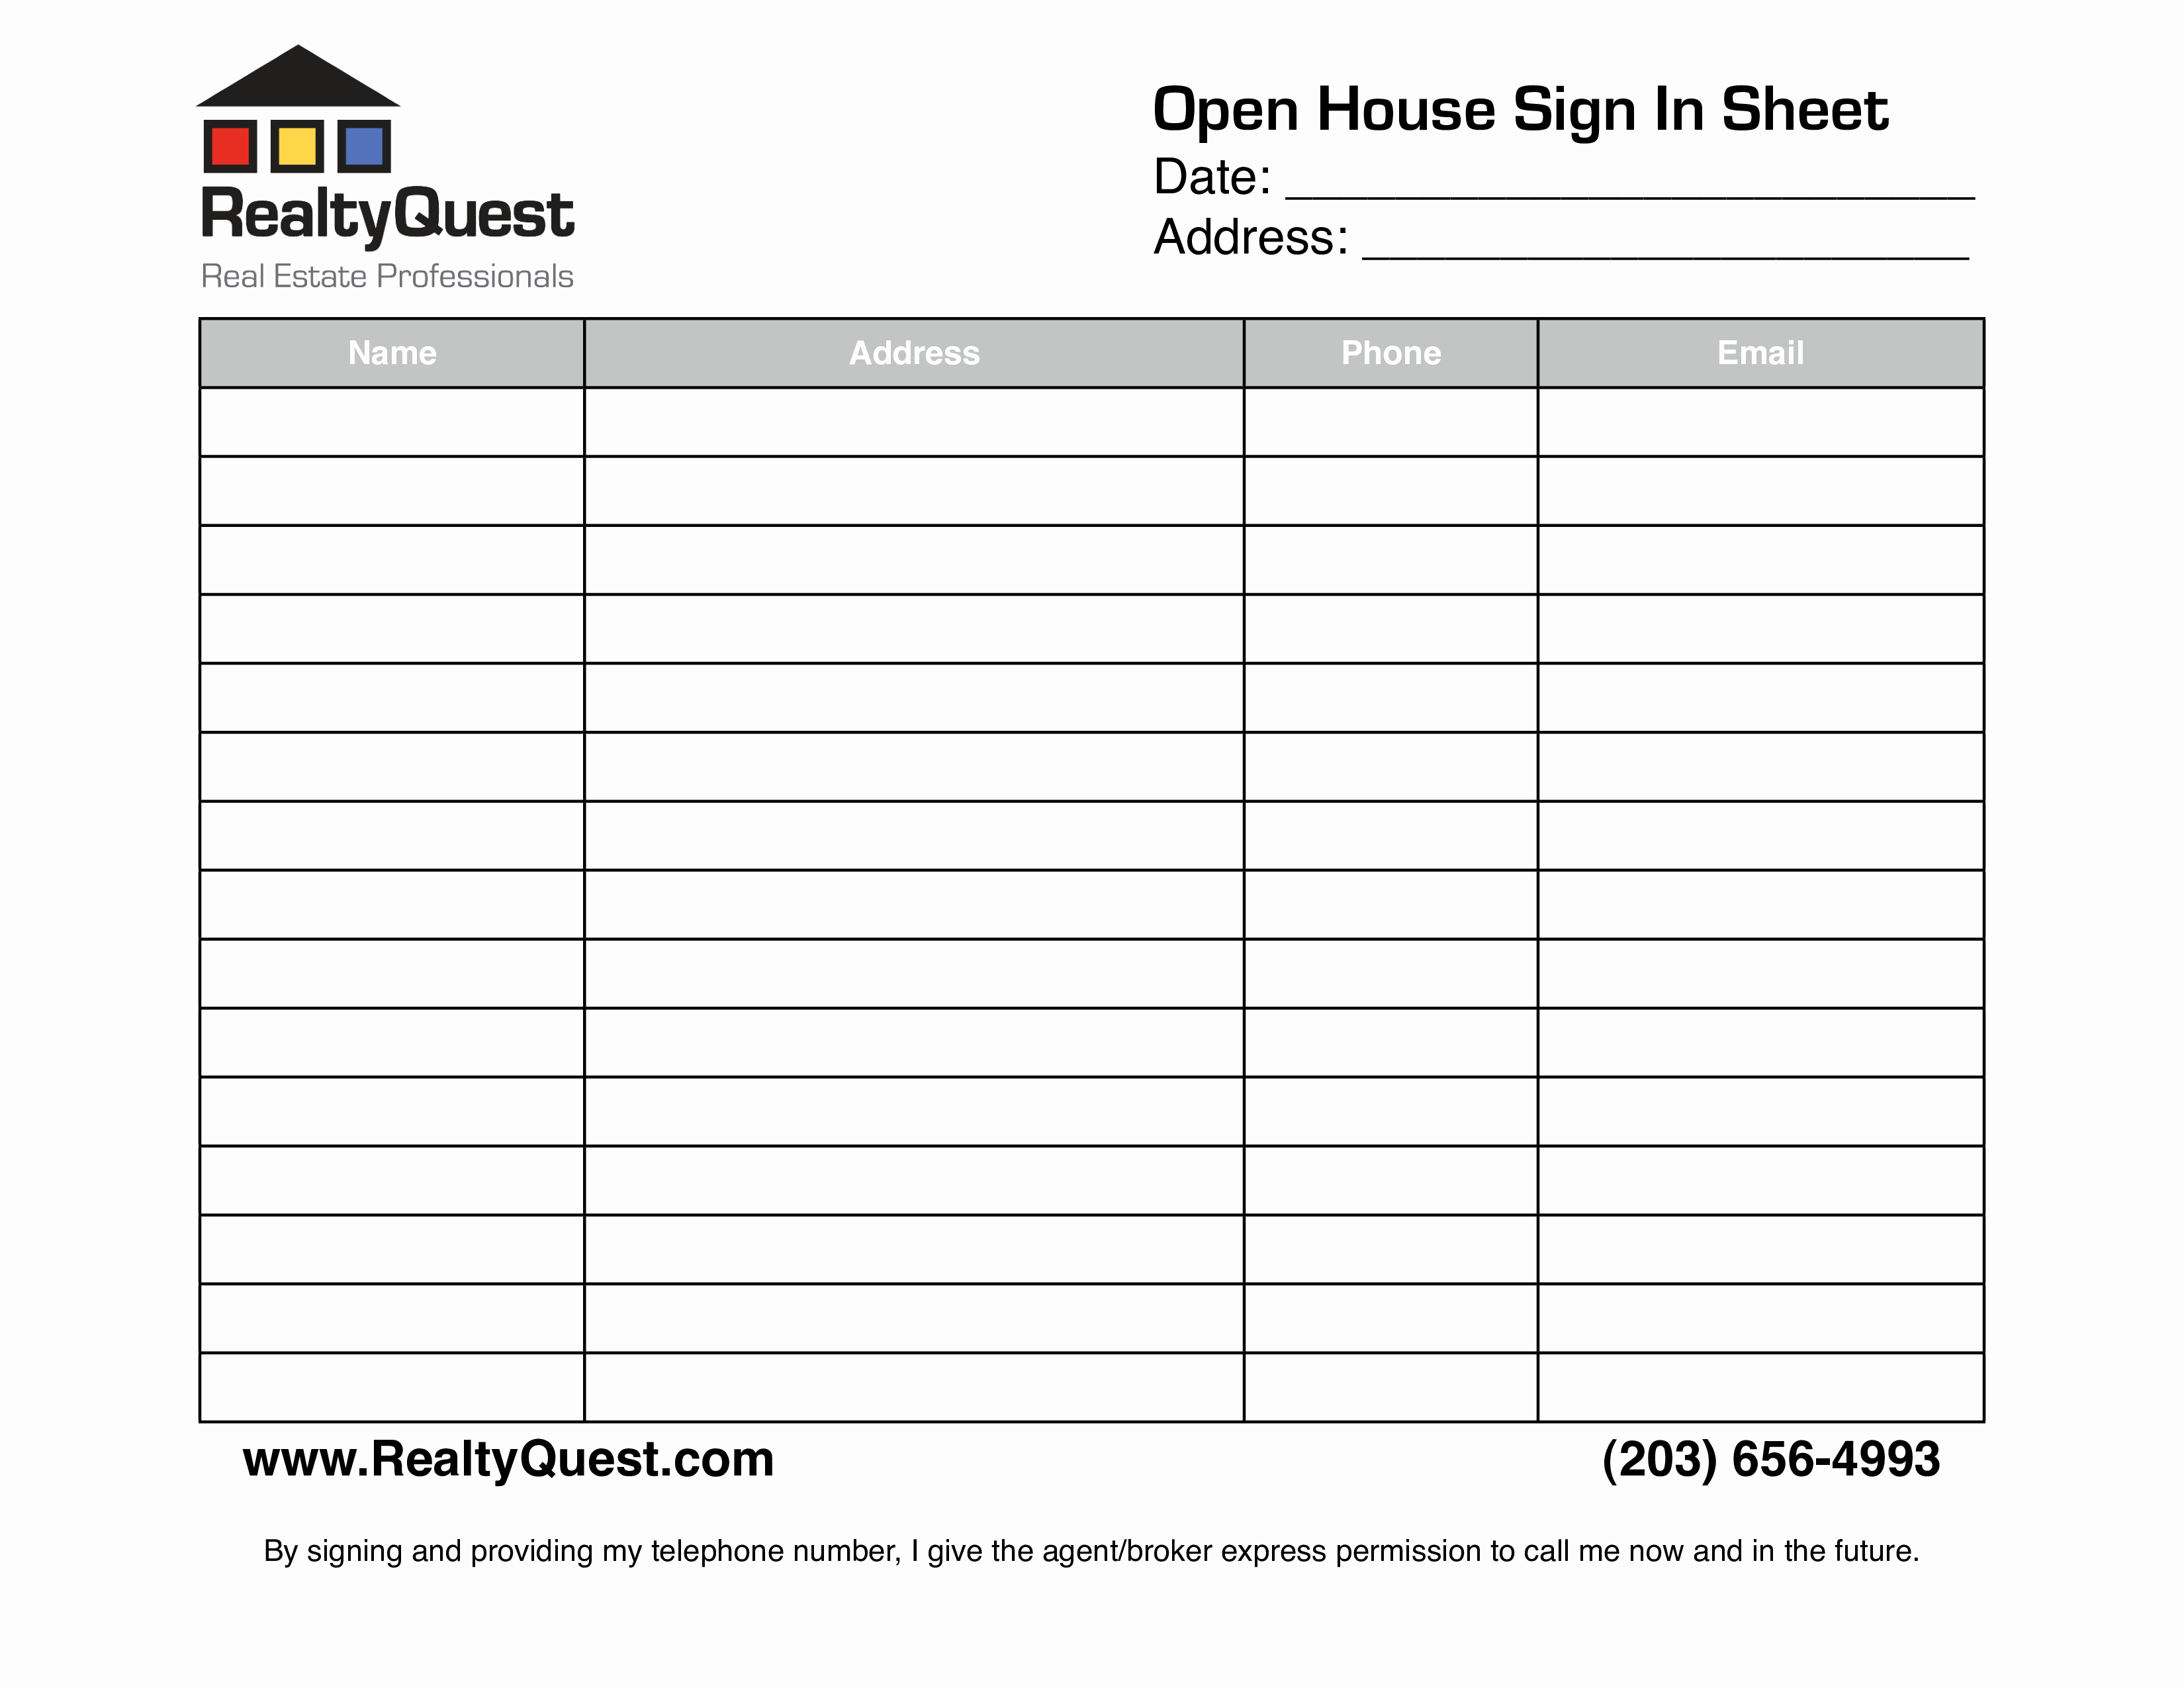 Open House Sign In Sheet Inspirational Real Estate Open House Sign In Sheet